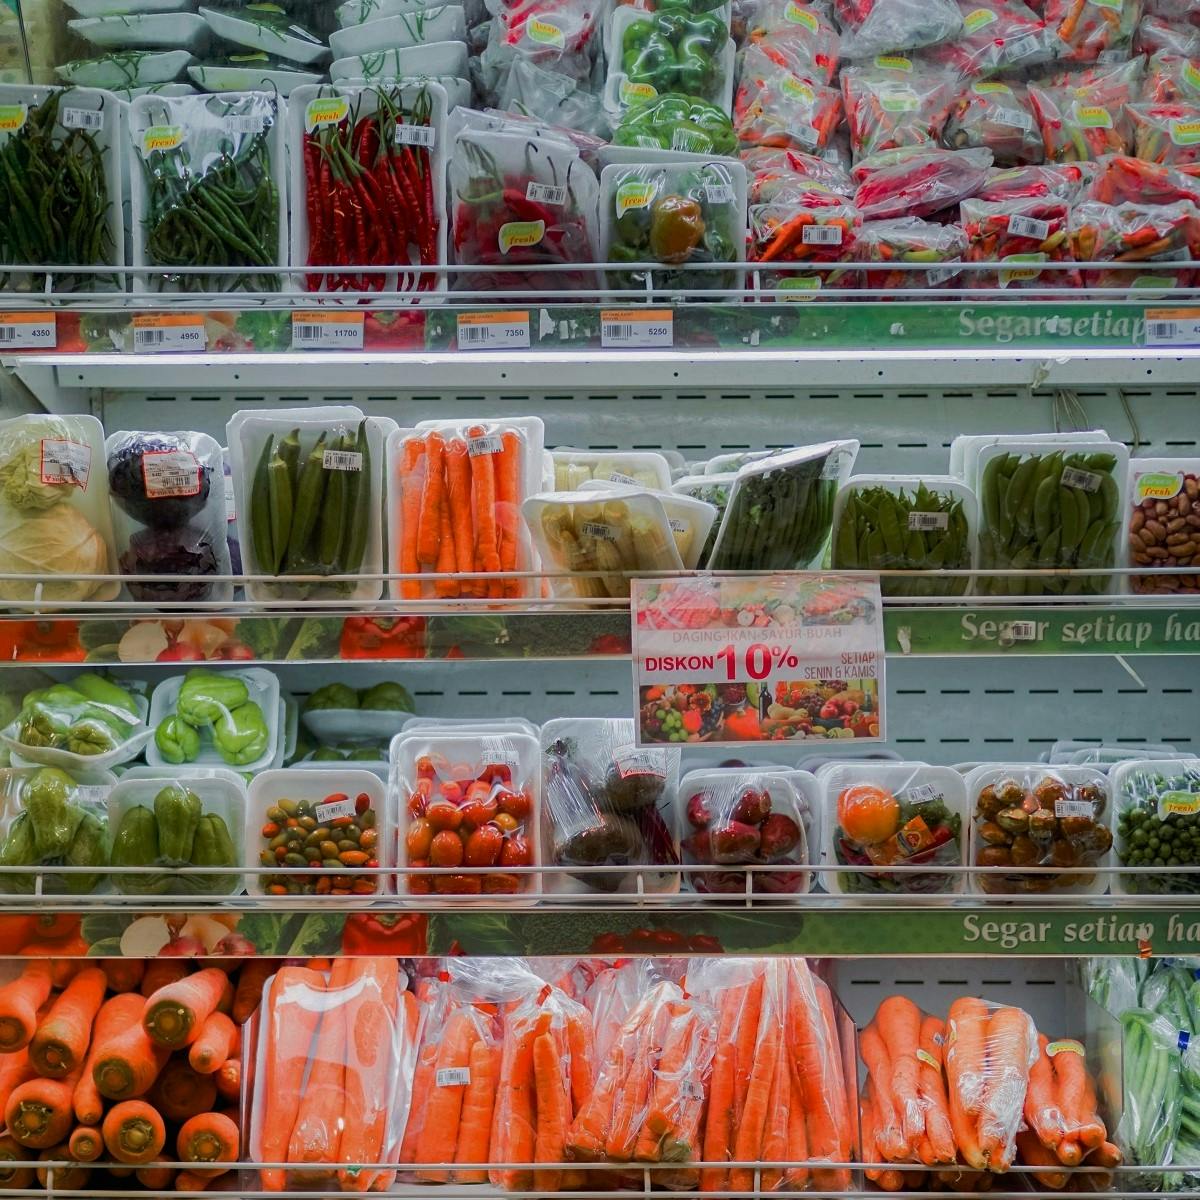 Various vegetables wrapped in plastic packaging in a supermarket. To refuse single use plastics such as needless packaging, is the first steps in living plastic free.